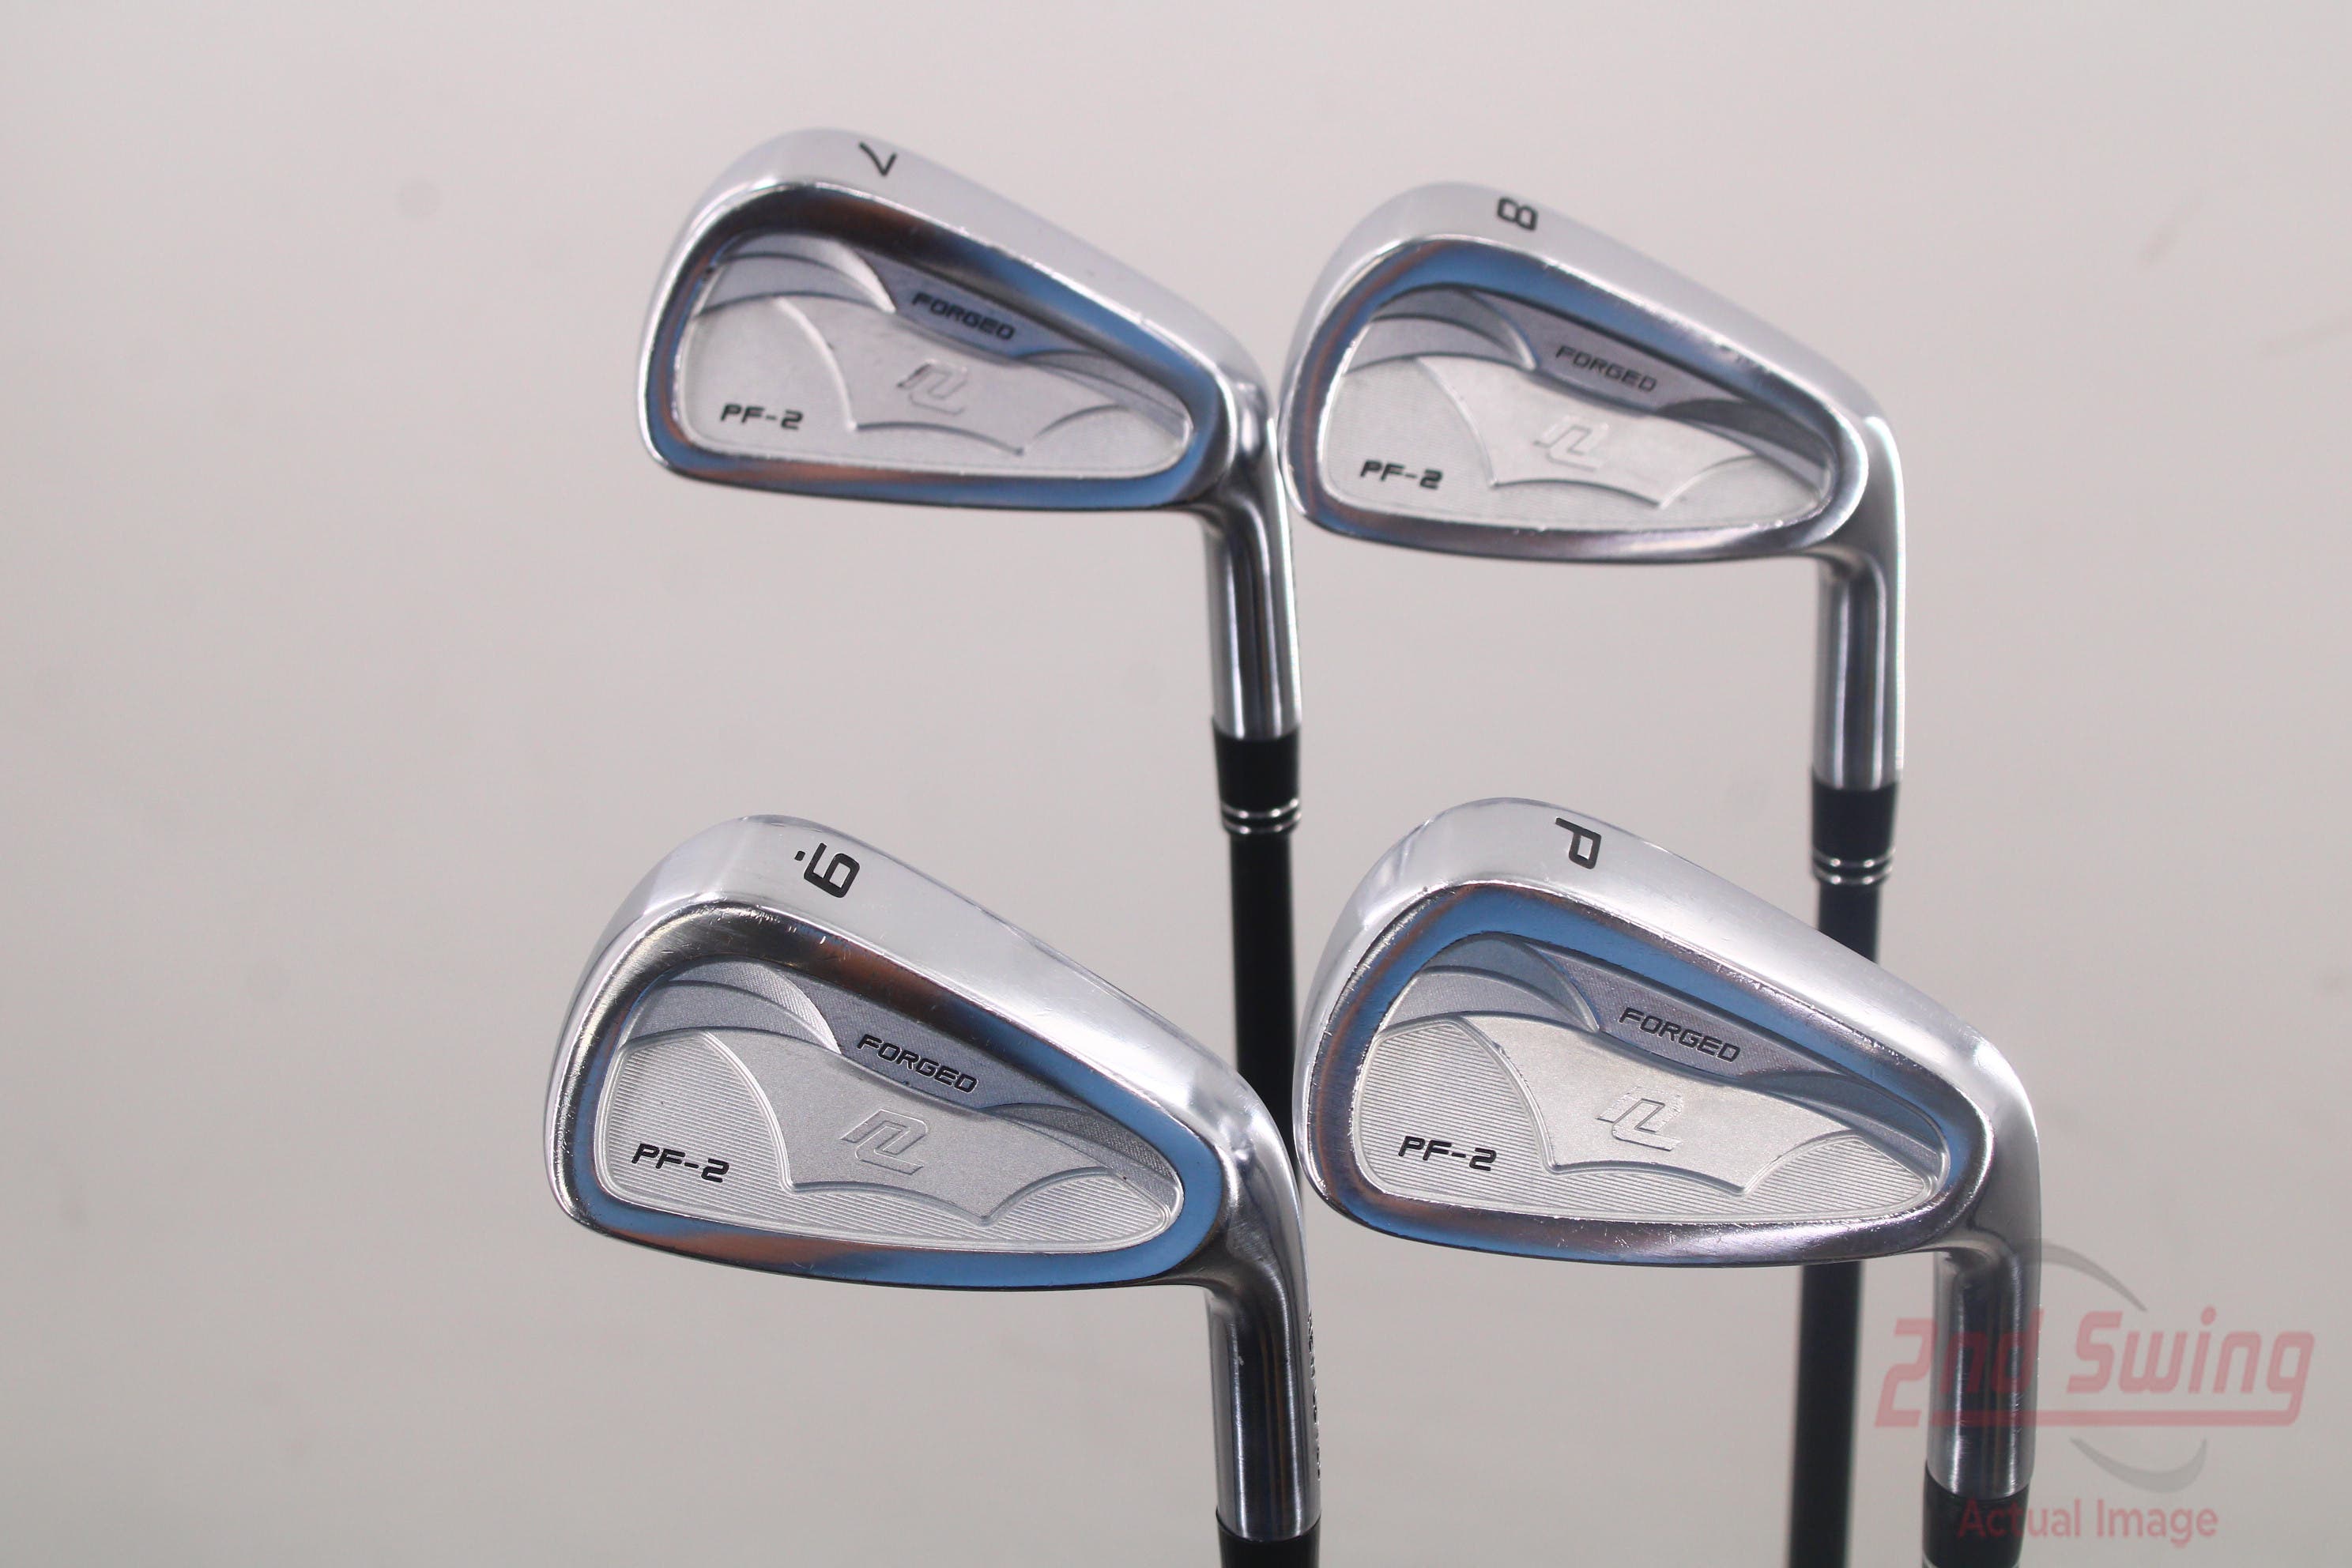 New Level PF-2 Forged Iron Set (D-D2120816287)